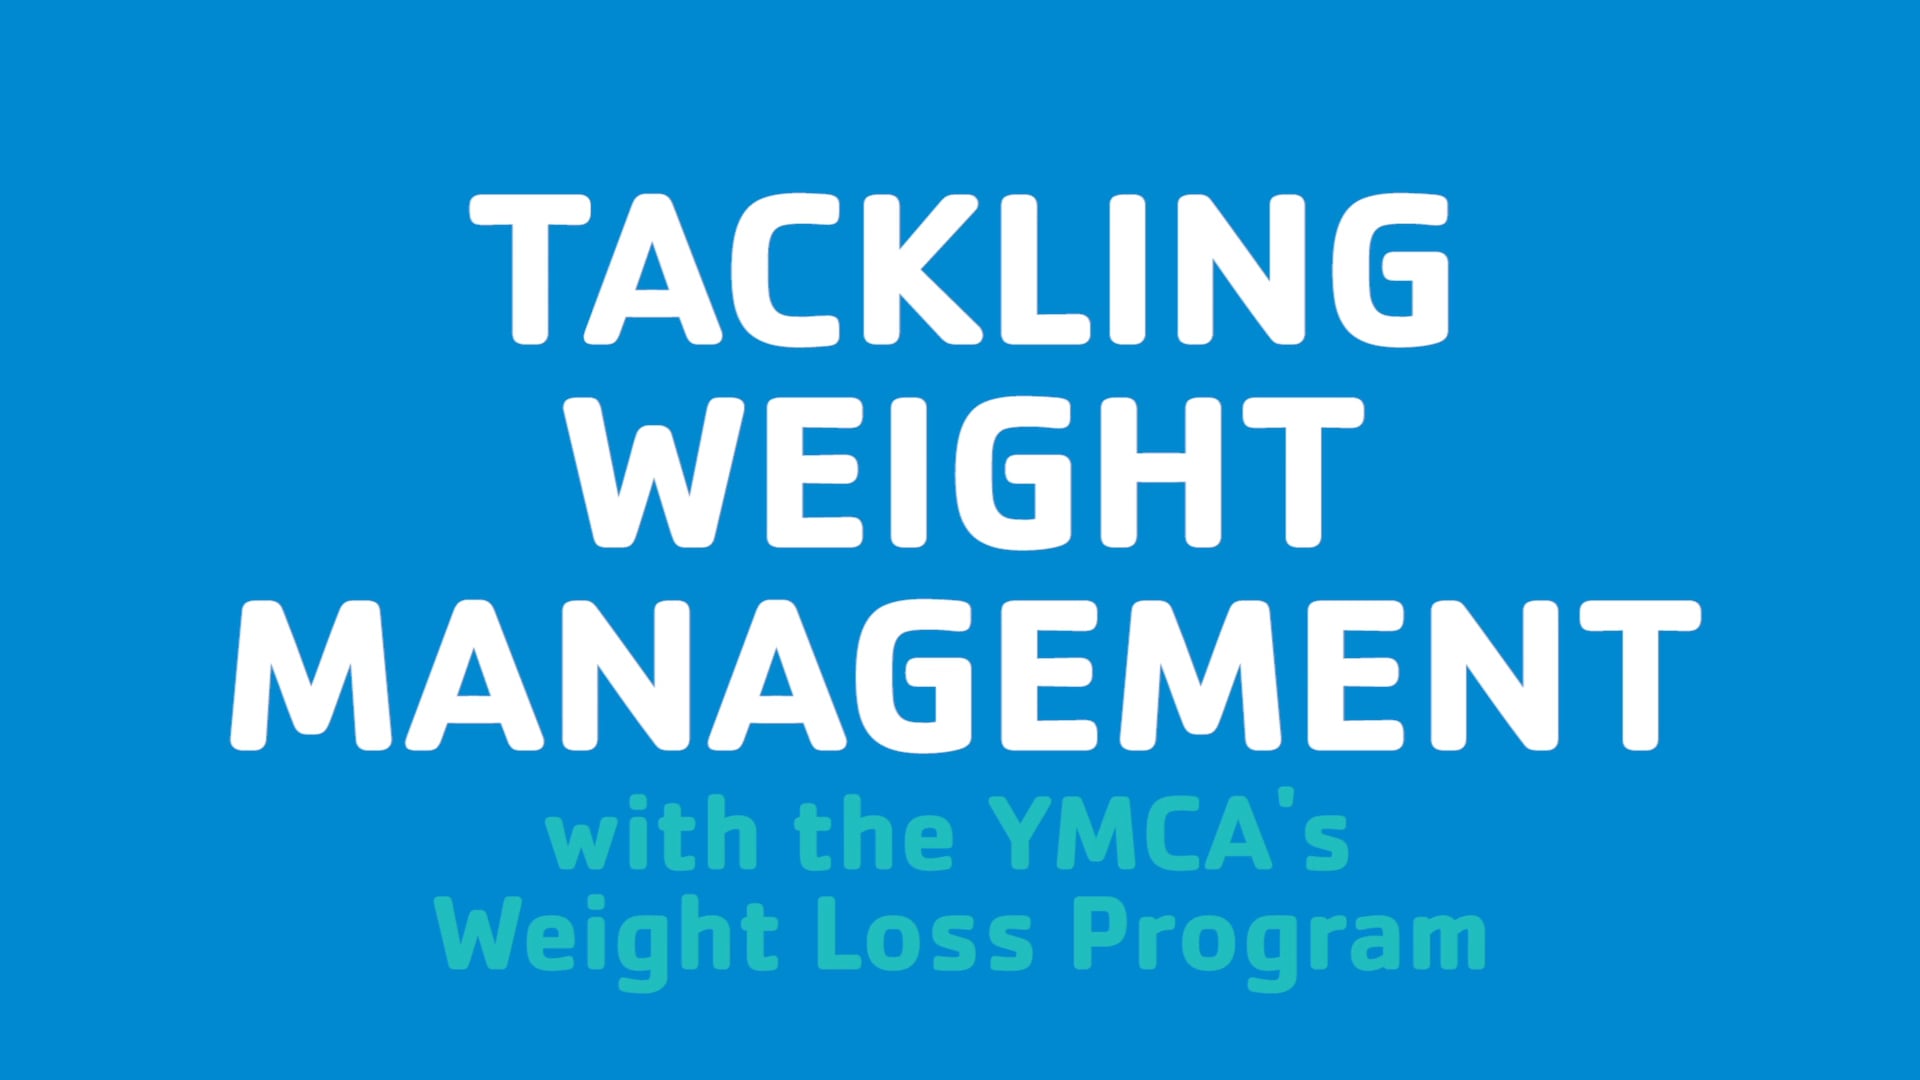 Tackling Weight Management with the YMCA’s Weight Loss Program